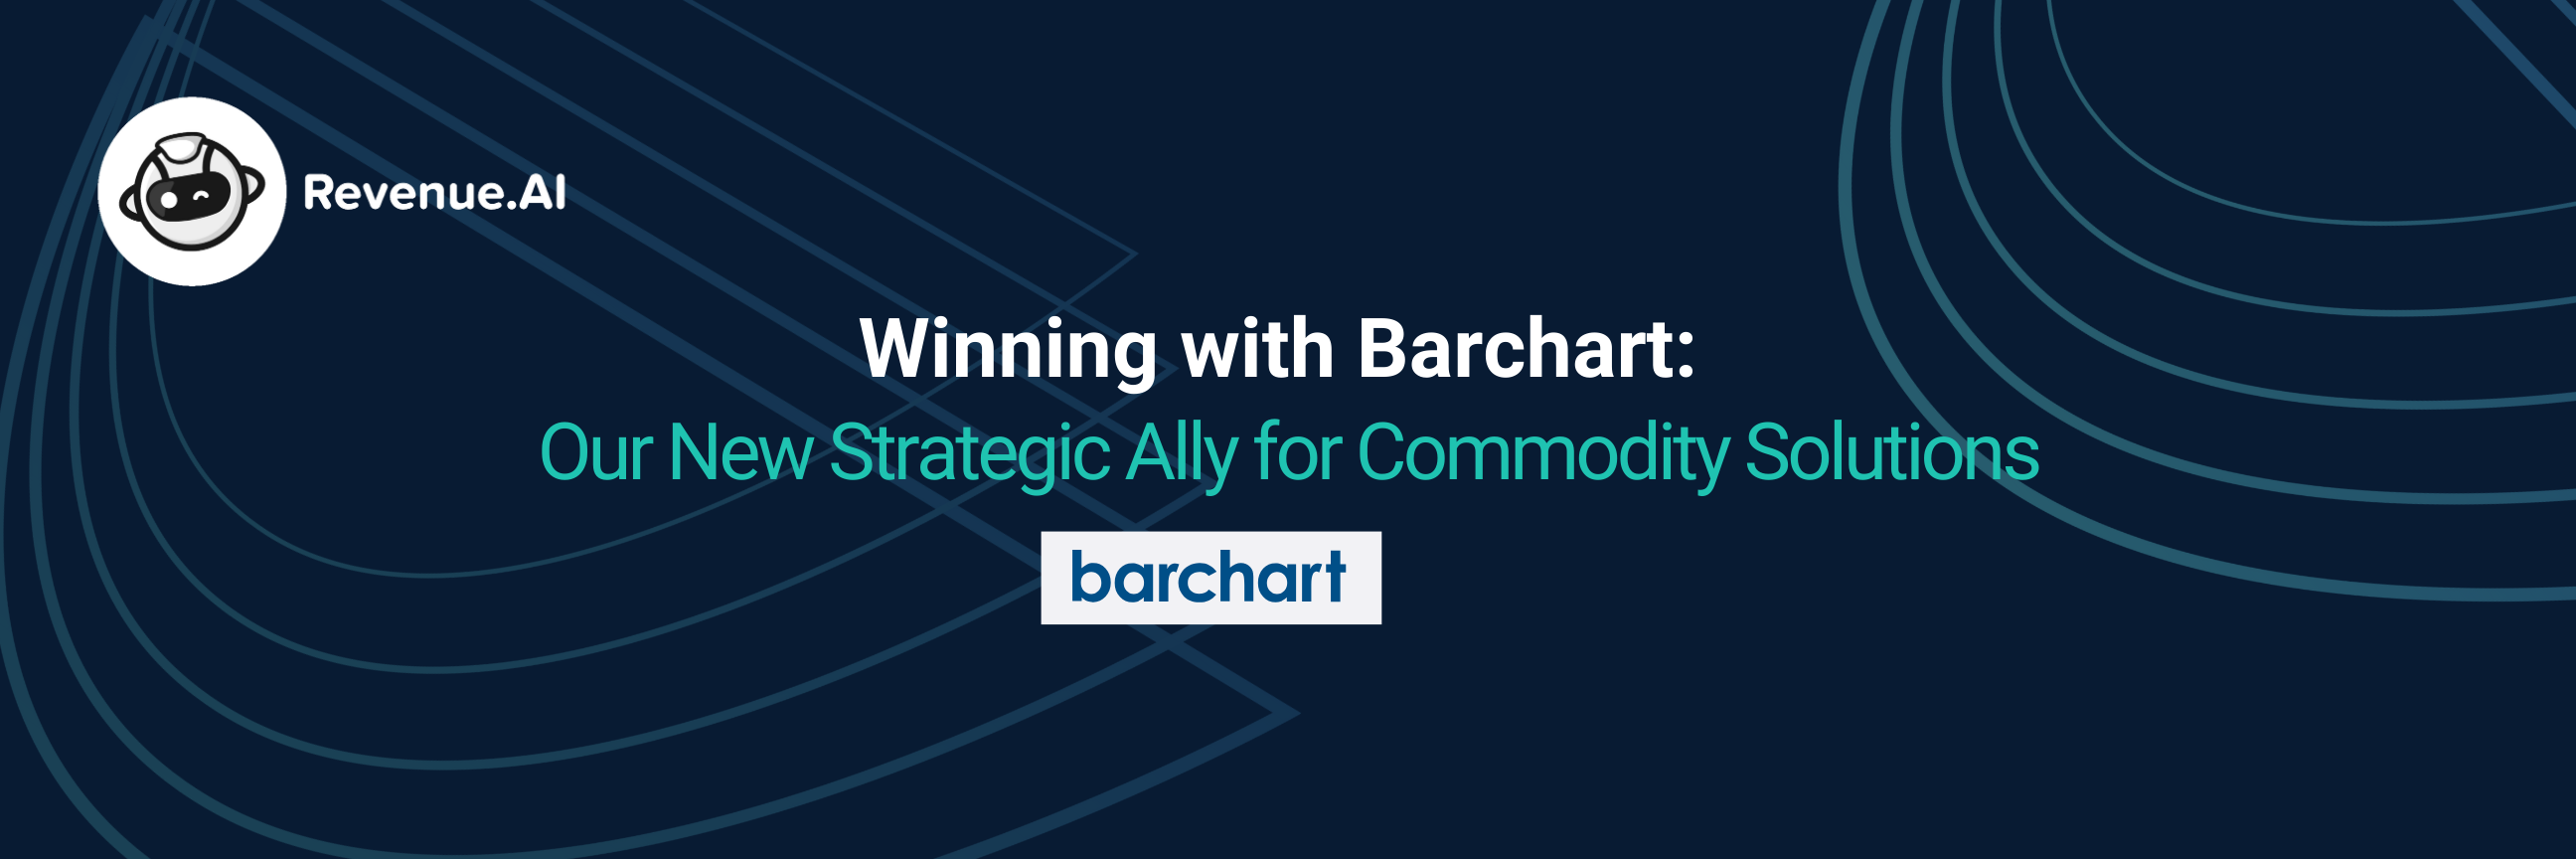 Winning with Barchart and Revenue.AI